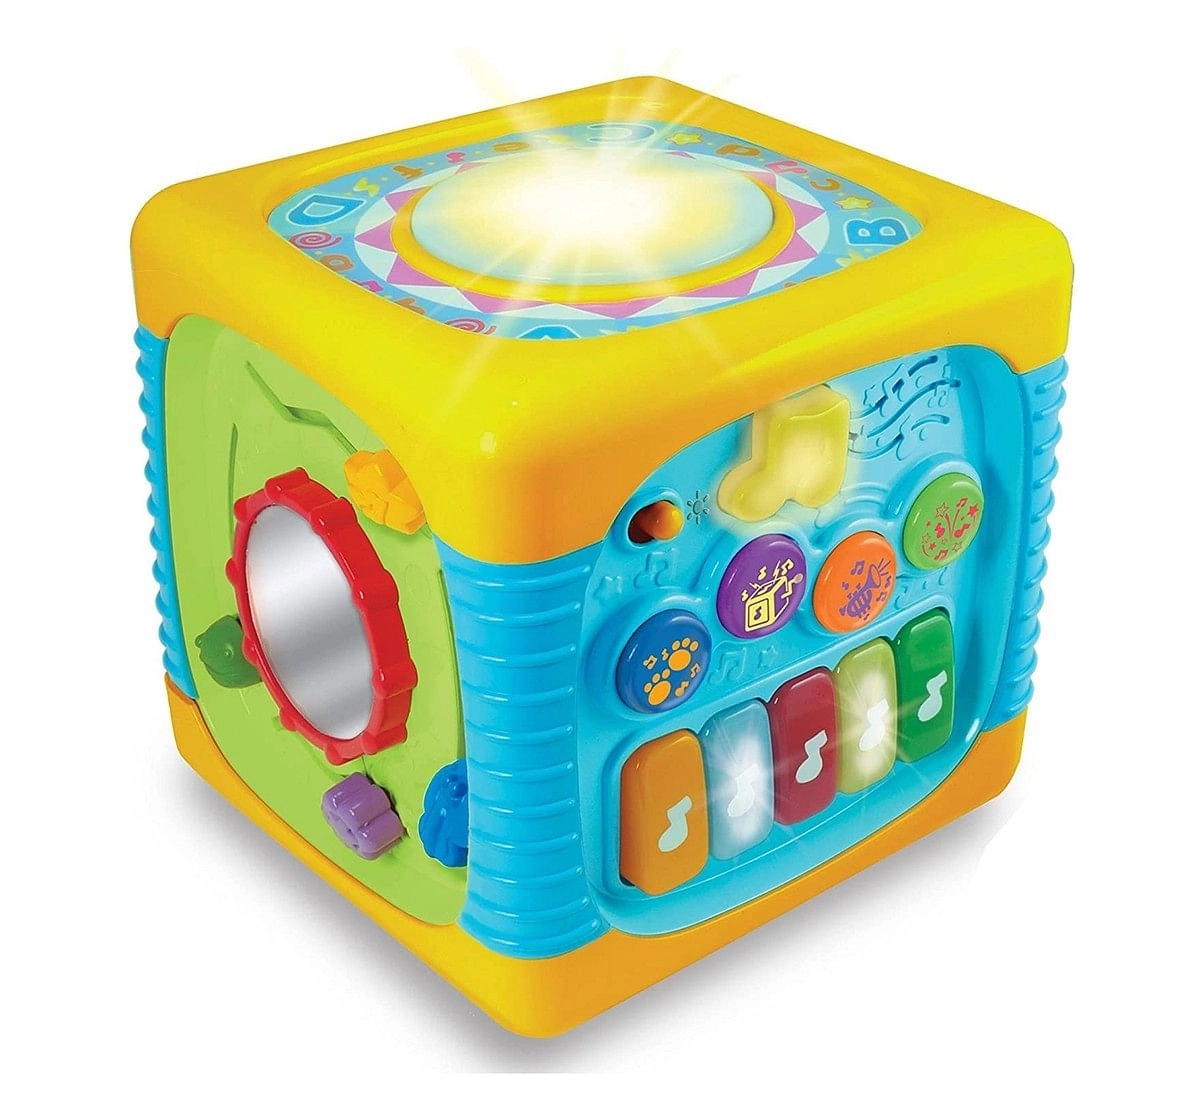 Winfun - Music Fun Activity Cube Learning Toys for Kids age 8M+ 